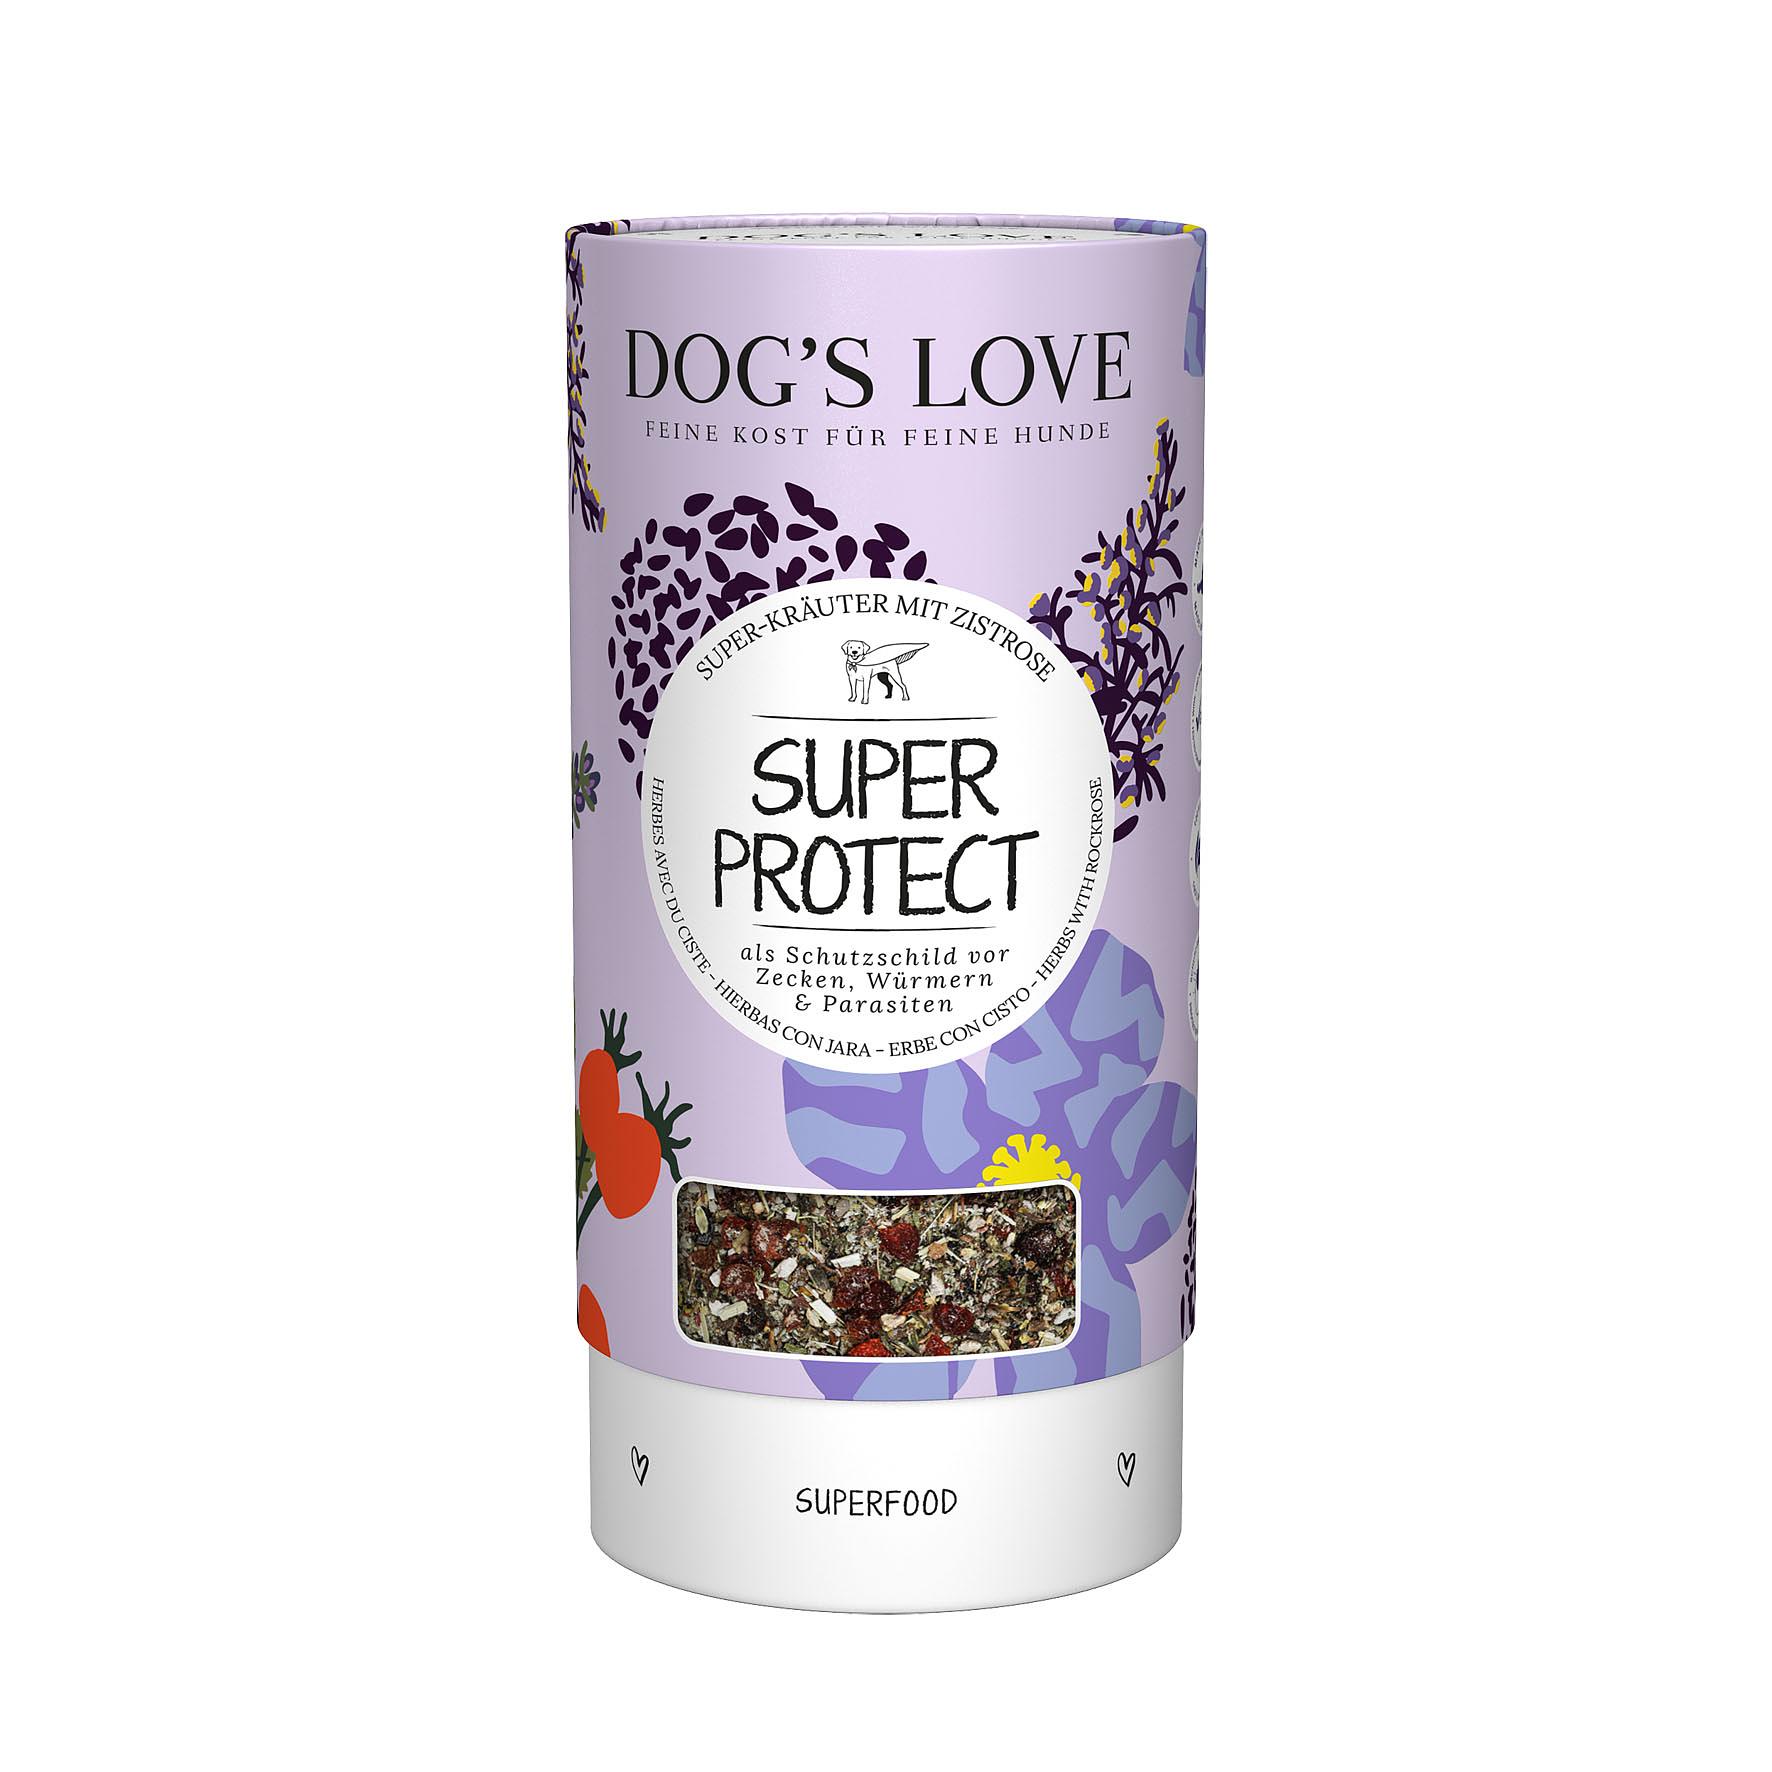 DOG'S LOVE Super-Protect 70g